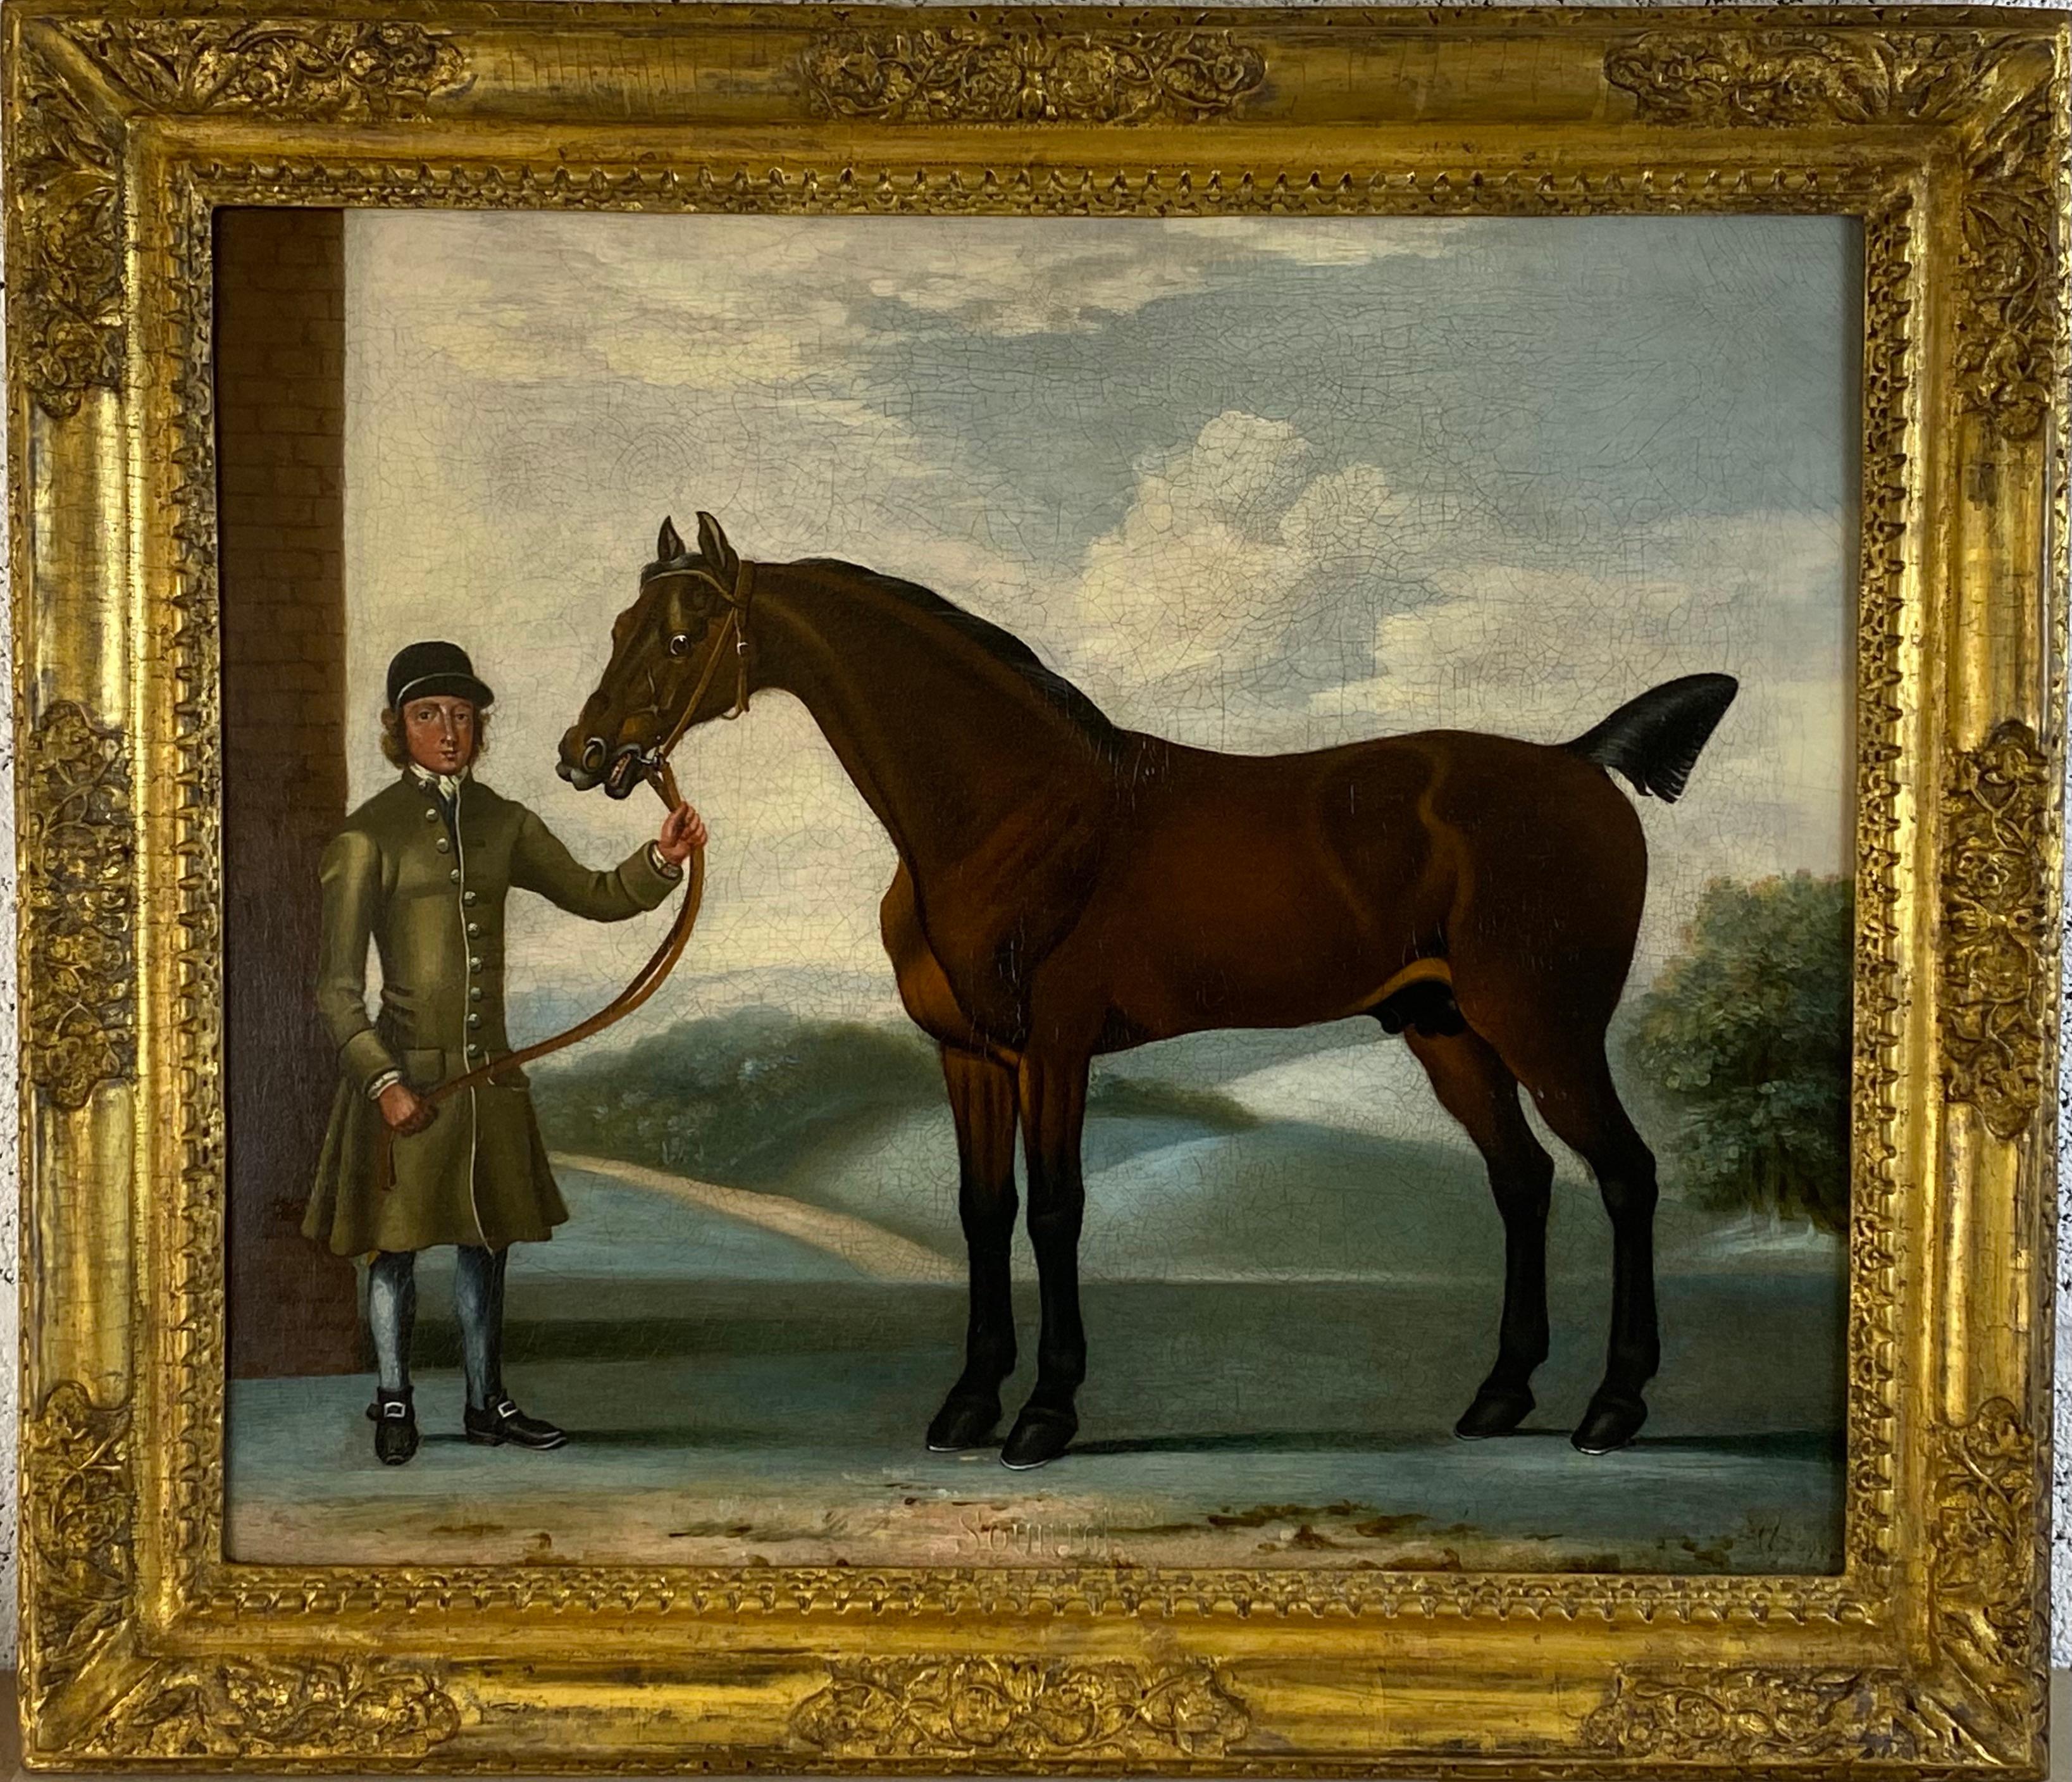 The racehorse 'Squirrel' held by a groom